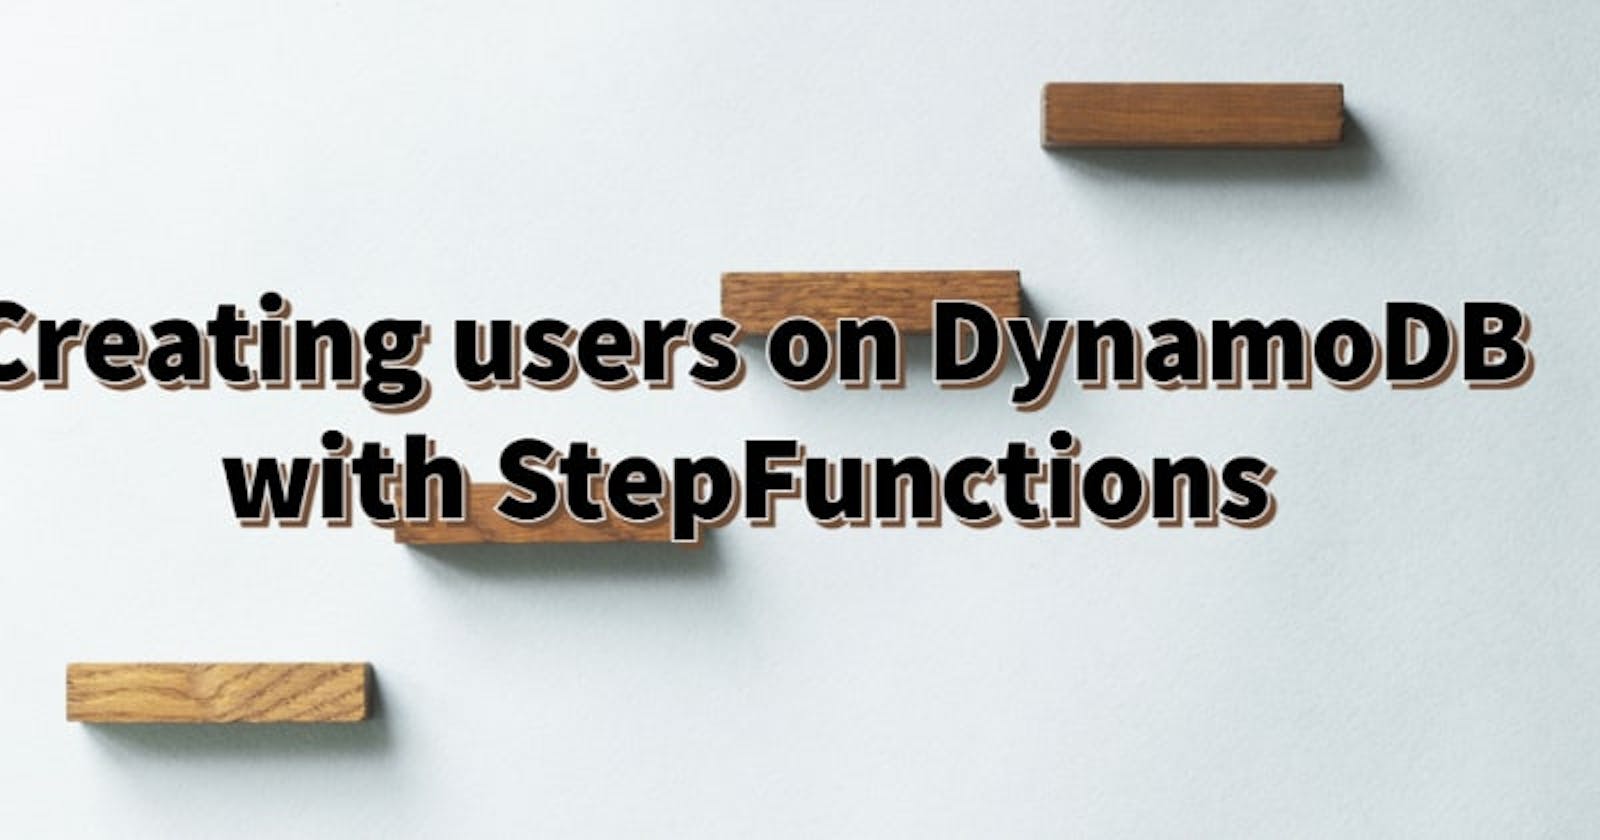 Creating users on DynamoDB with Step Functions